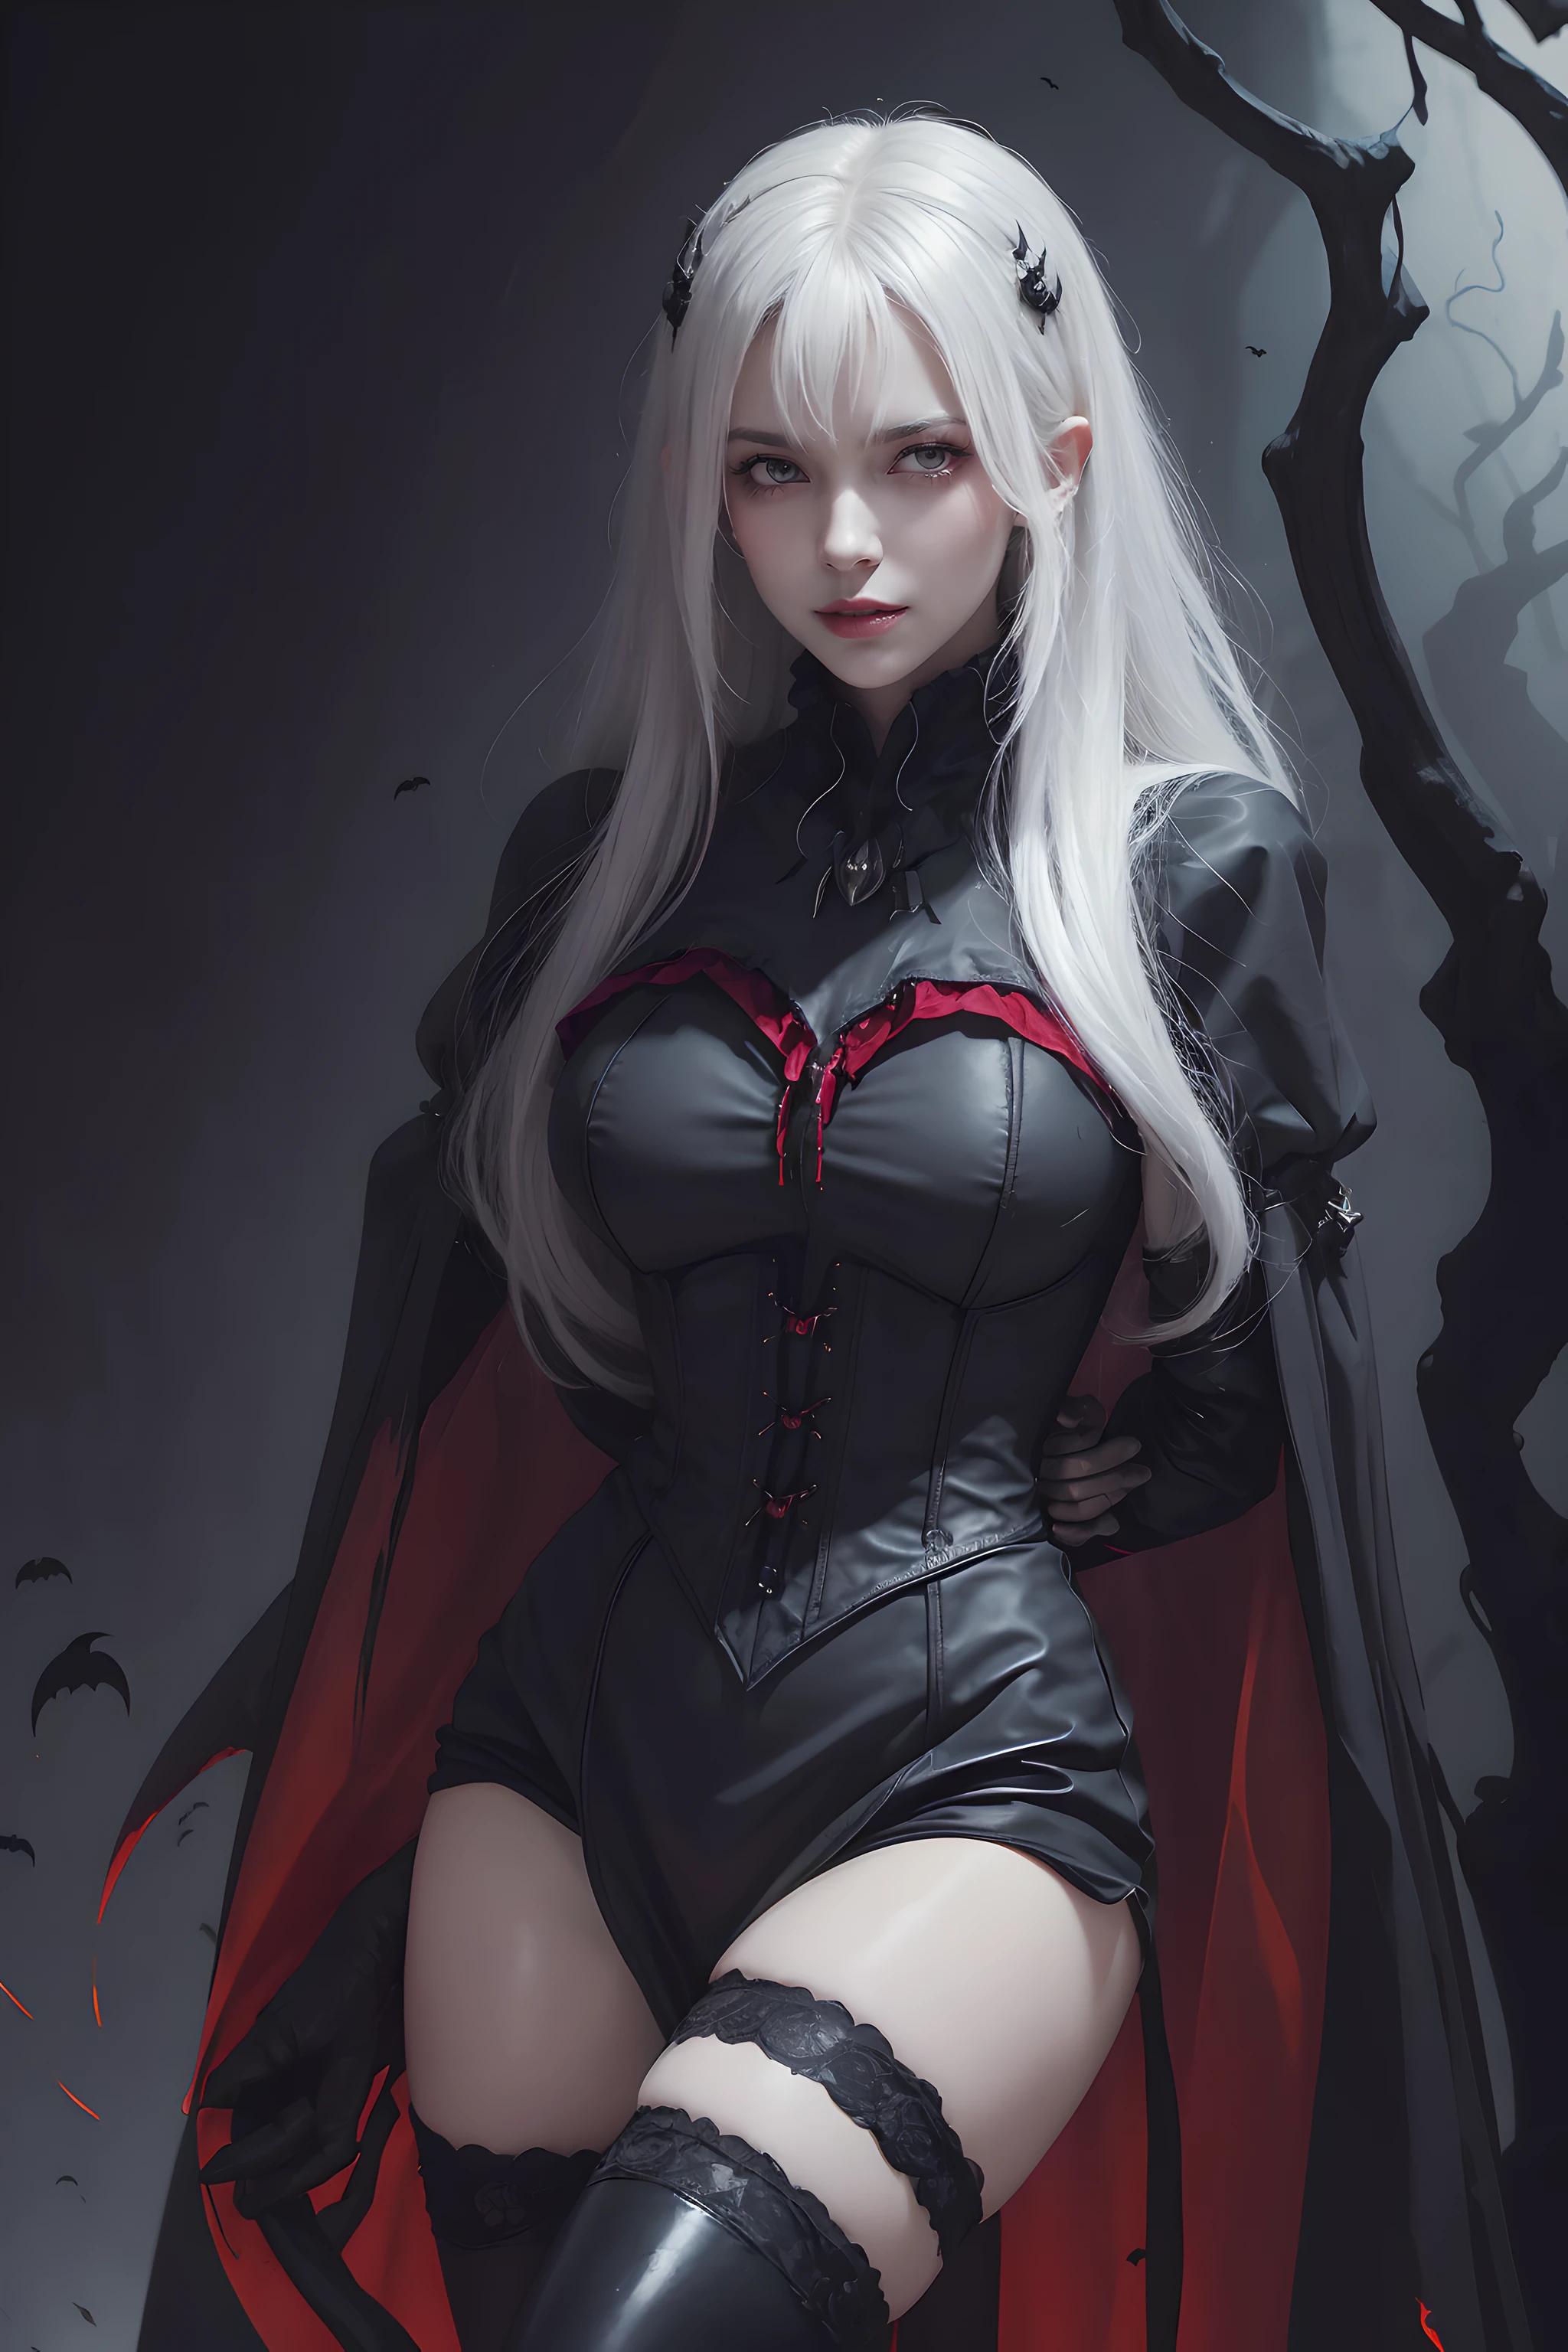 (Halloween theme:1.3), (fantasy:1.3), (vampire queen:1.3), (silver long hair:1.3), (red eyes:1.3), (vampire fangs:1.3), (extremely pretty and beautiful vampire queen:1.3), BREAK, Beautiful illustration, top-quality, (cute Russian vampire queen:1.3, Caucasian:1.3), having vampire features, (vampire queen:1.5), BREAK, (red eyes:1.5, pale skin:1.1), (beautiful, 20 years old:1.5), slim, slender, (big sagging breasts), (clean face:1.3), (vampire fangs:1.3), (ash hair:1.3), (white hair:1.3), (silver hair:1.3), BREAK, (black elegant full lacy gothic dress), (latex corset), (black latex stockings), (knee-high-over-boots, pin-hells), (insanely detailed clothes), (halloween costume), BREAK, ((arms behind back:1.5)), blue eyess, lovely thighs, (jack o'lantern:1.3), (looking straight at the viewer), (view viewer:1.3), (upper body:1.3), top angle, simple black background, (((dark background:1.5))), (halloween:1.5), (halloween background:1.5), (low-key lighting, (moody ambiance):1.2, dark shadows, subtle highlights, mysterious aura),